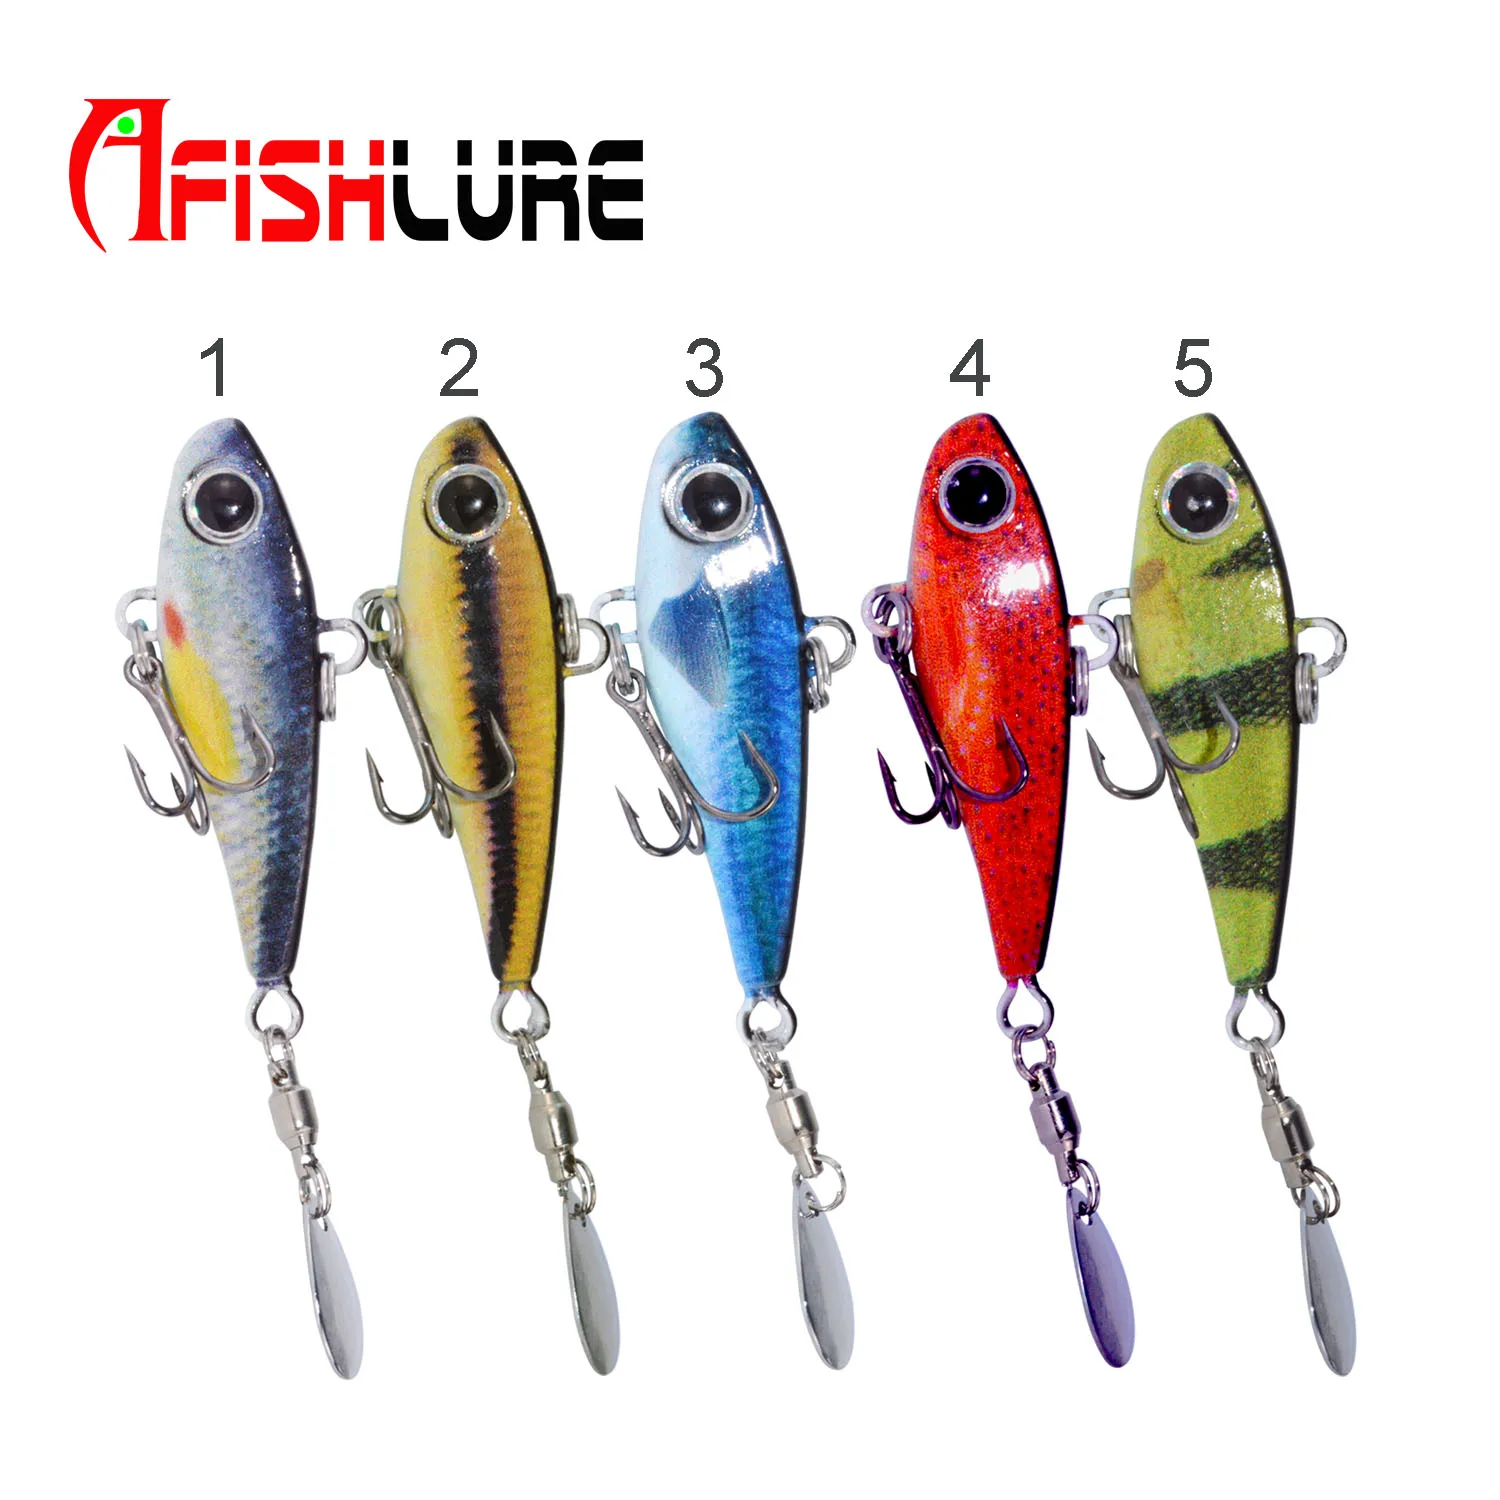 10g Metal Sequin Spinner Luminous Fishing Lures Jig Bait Lure with Treble Hook 